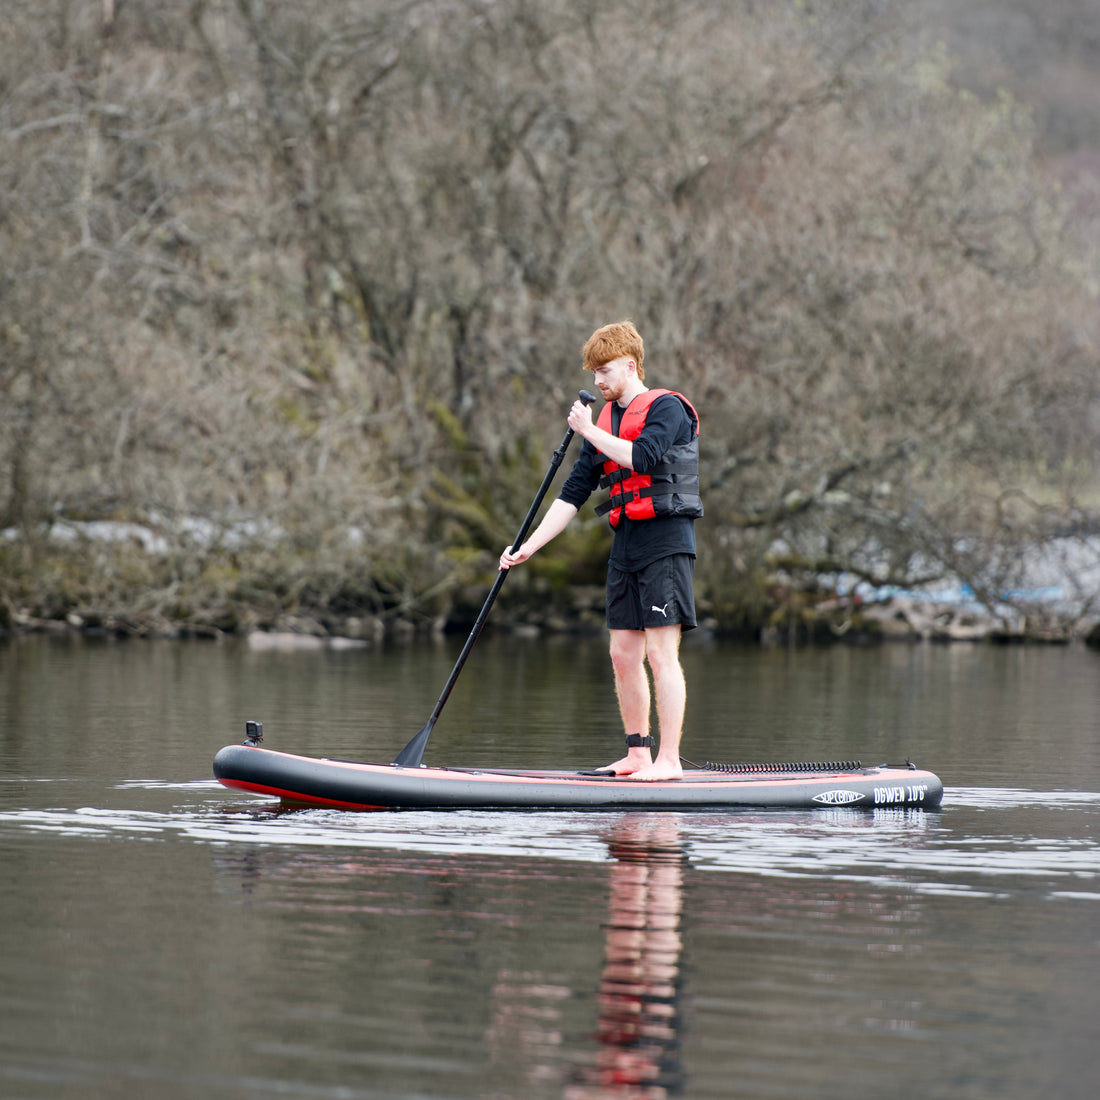 Our Top 5 Paddleboard locations in North Wales